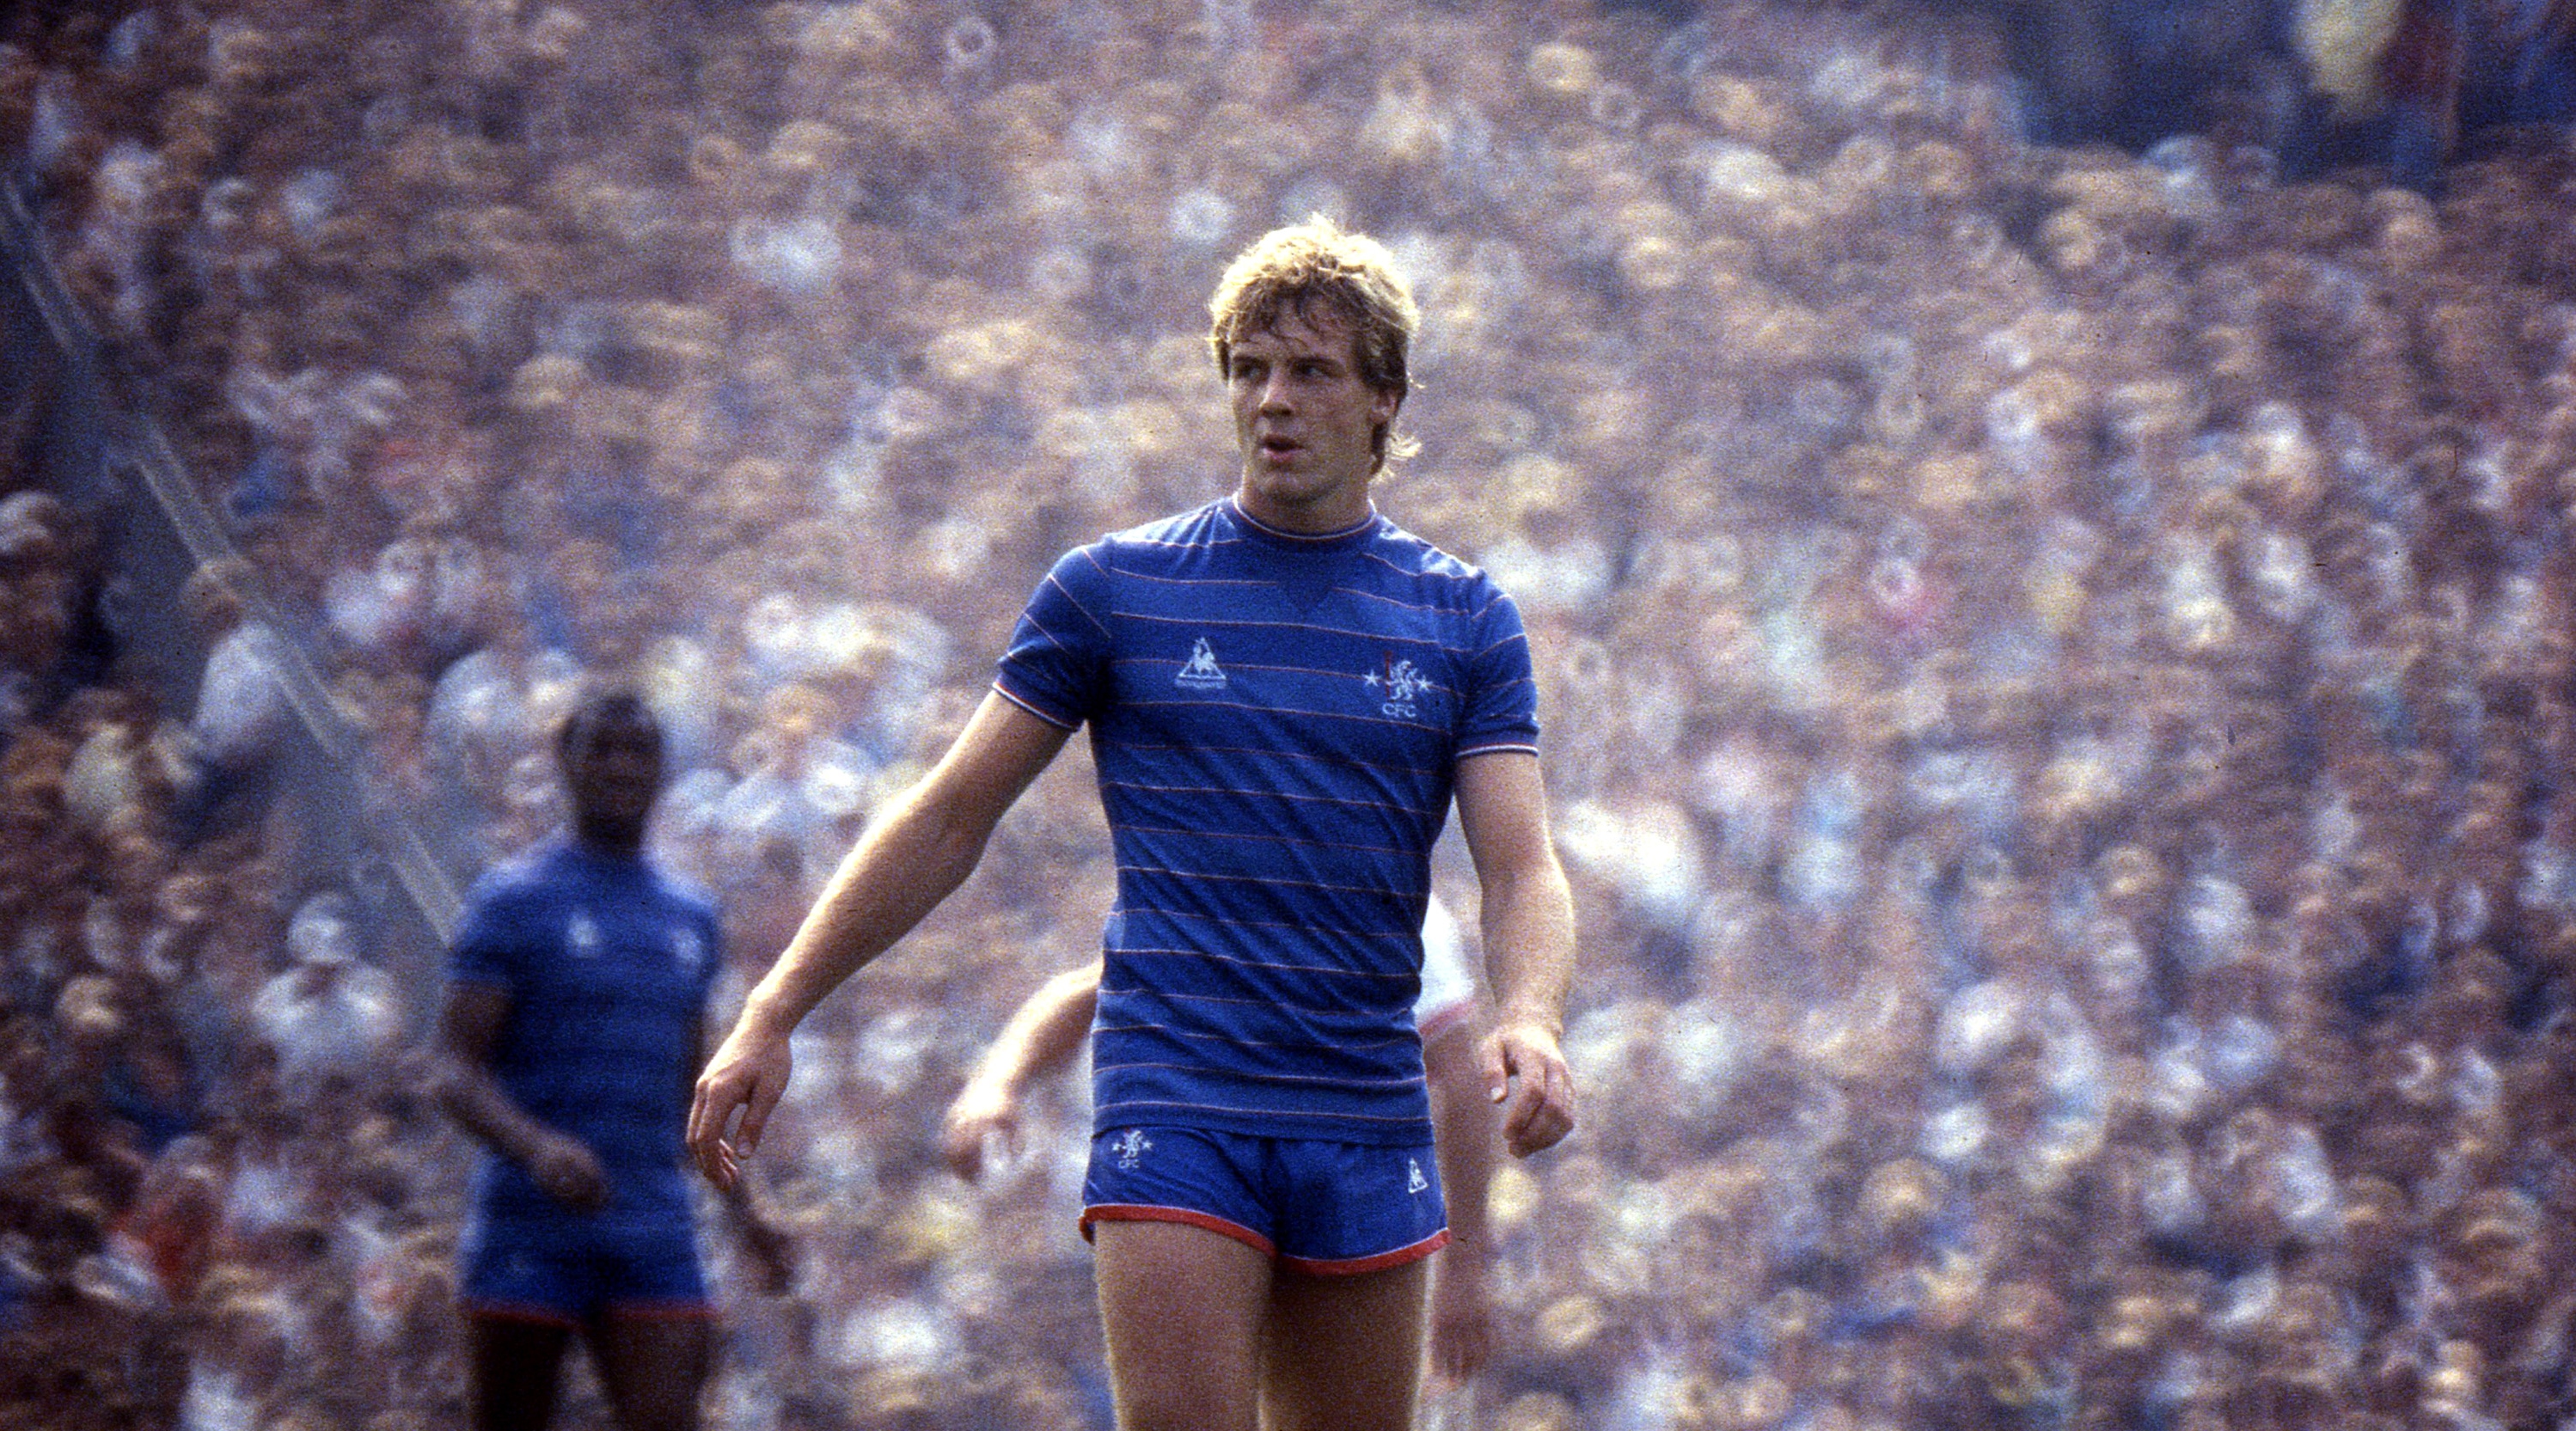 Kerry Dixon in action for Chelsea against Arsenal in August 1984.